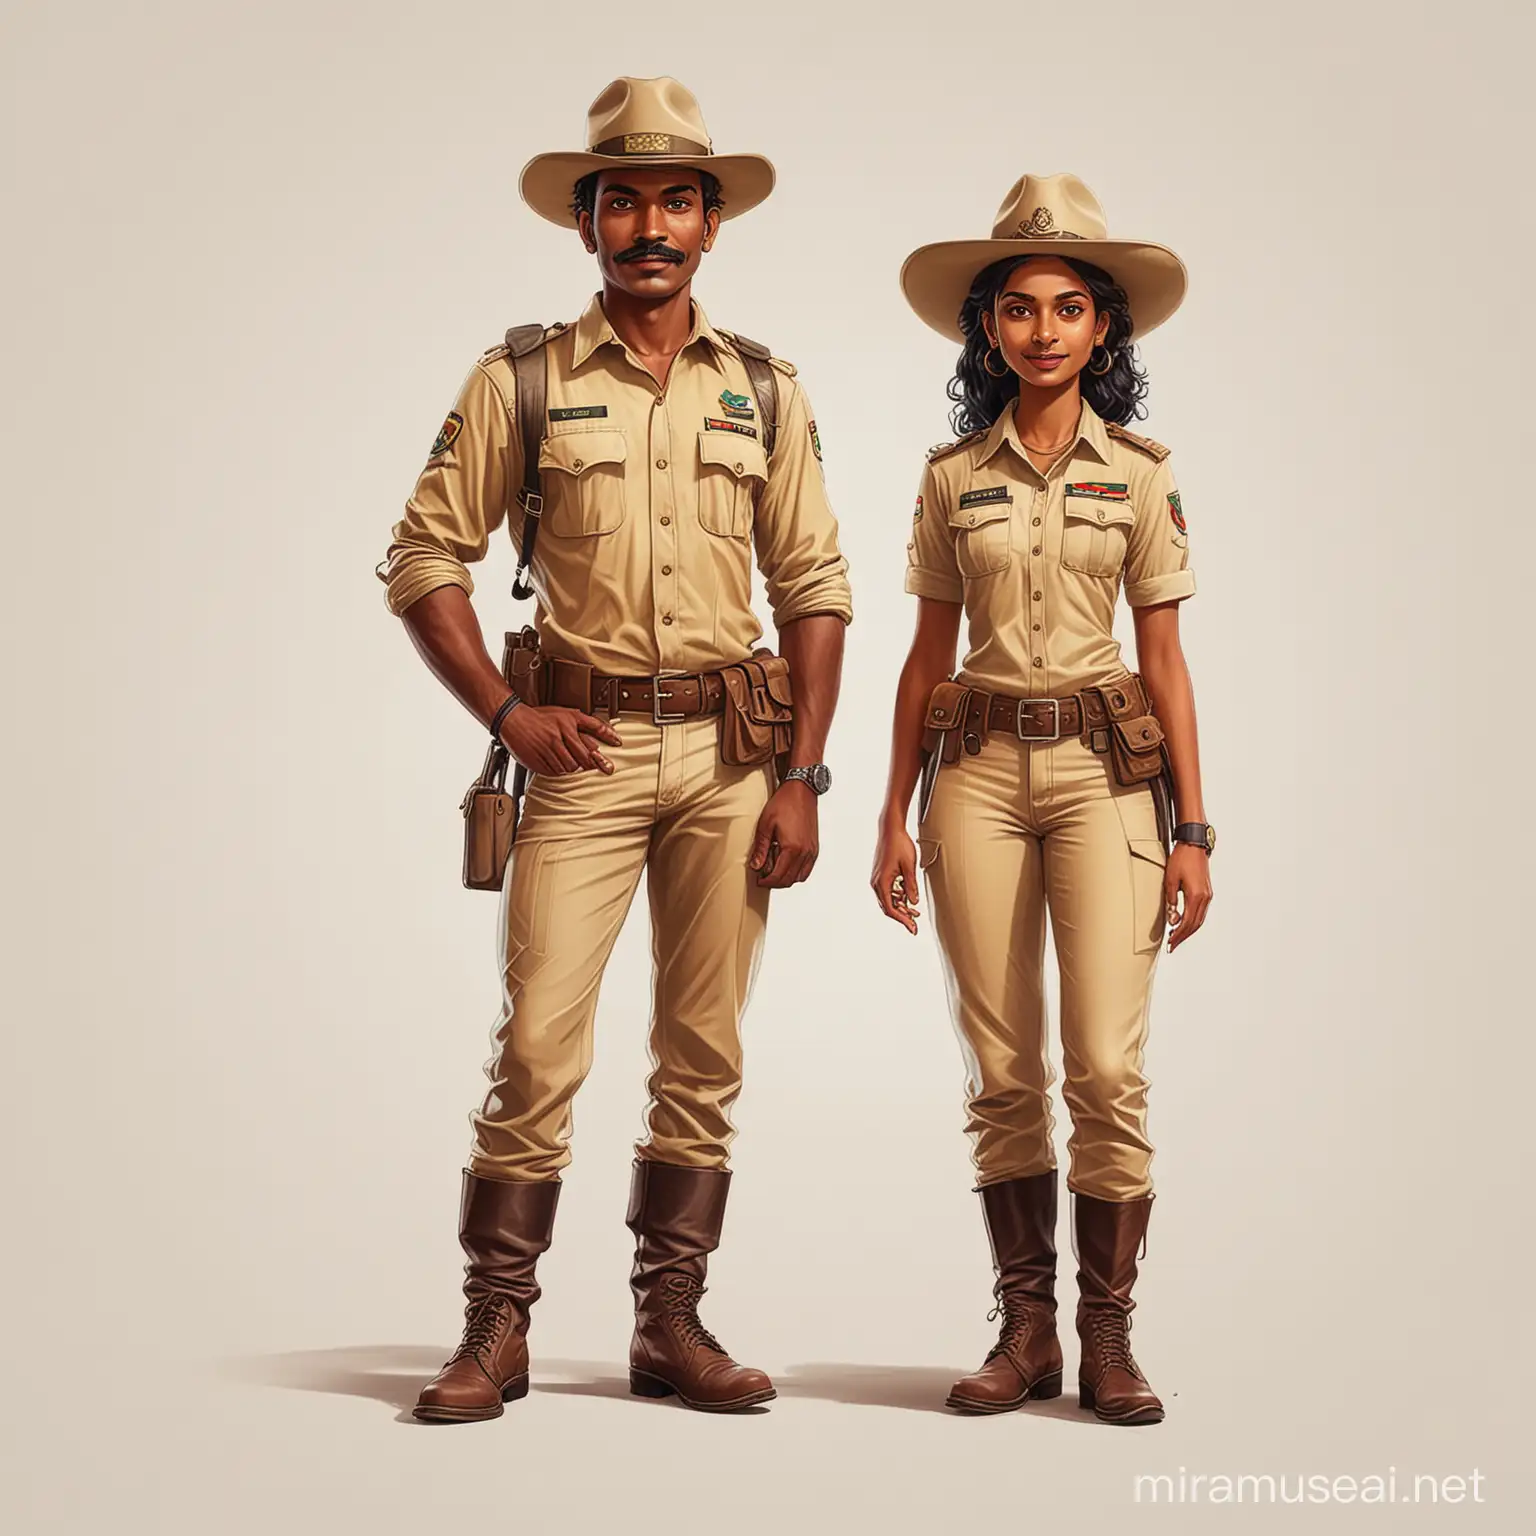 Simple vector art of one Indian dark skinned male forest ranger with short moustache and one Indian dark skinned female forest ranger. Both wearing hats. White plain background. Full length shot.